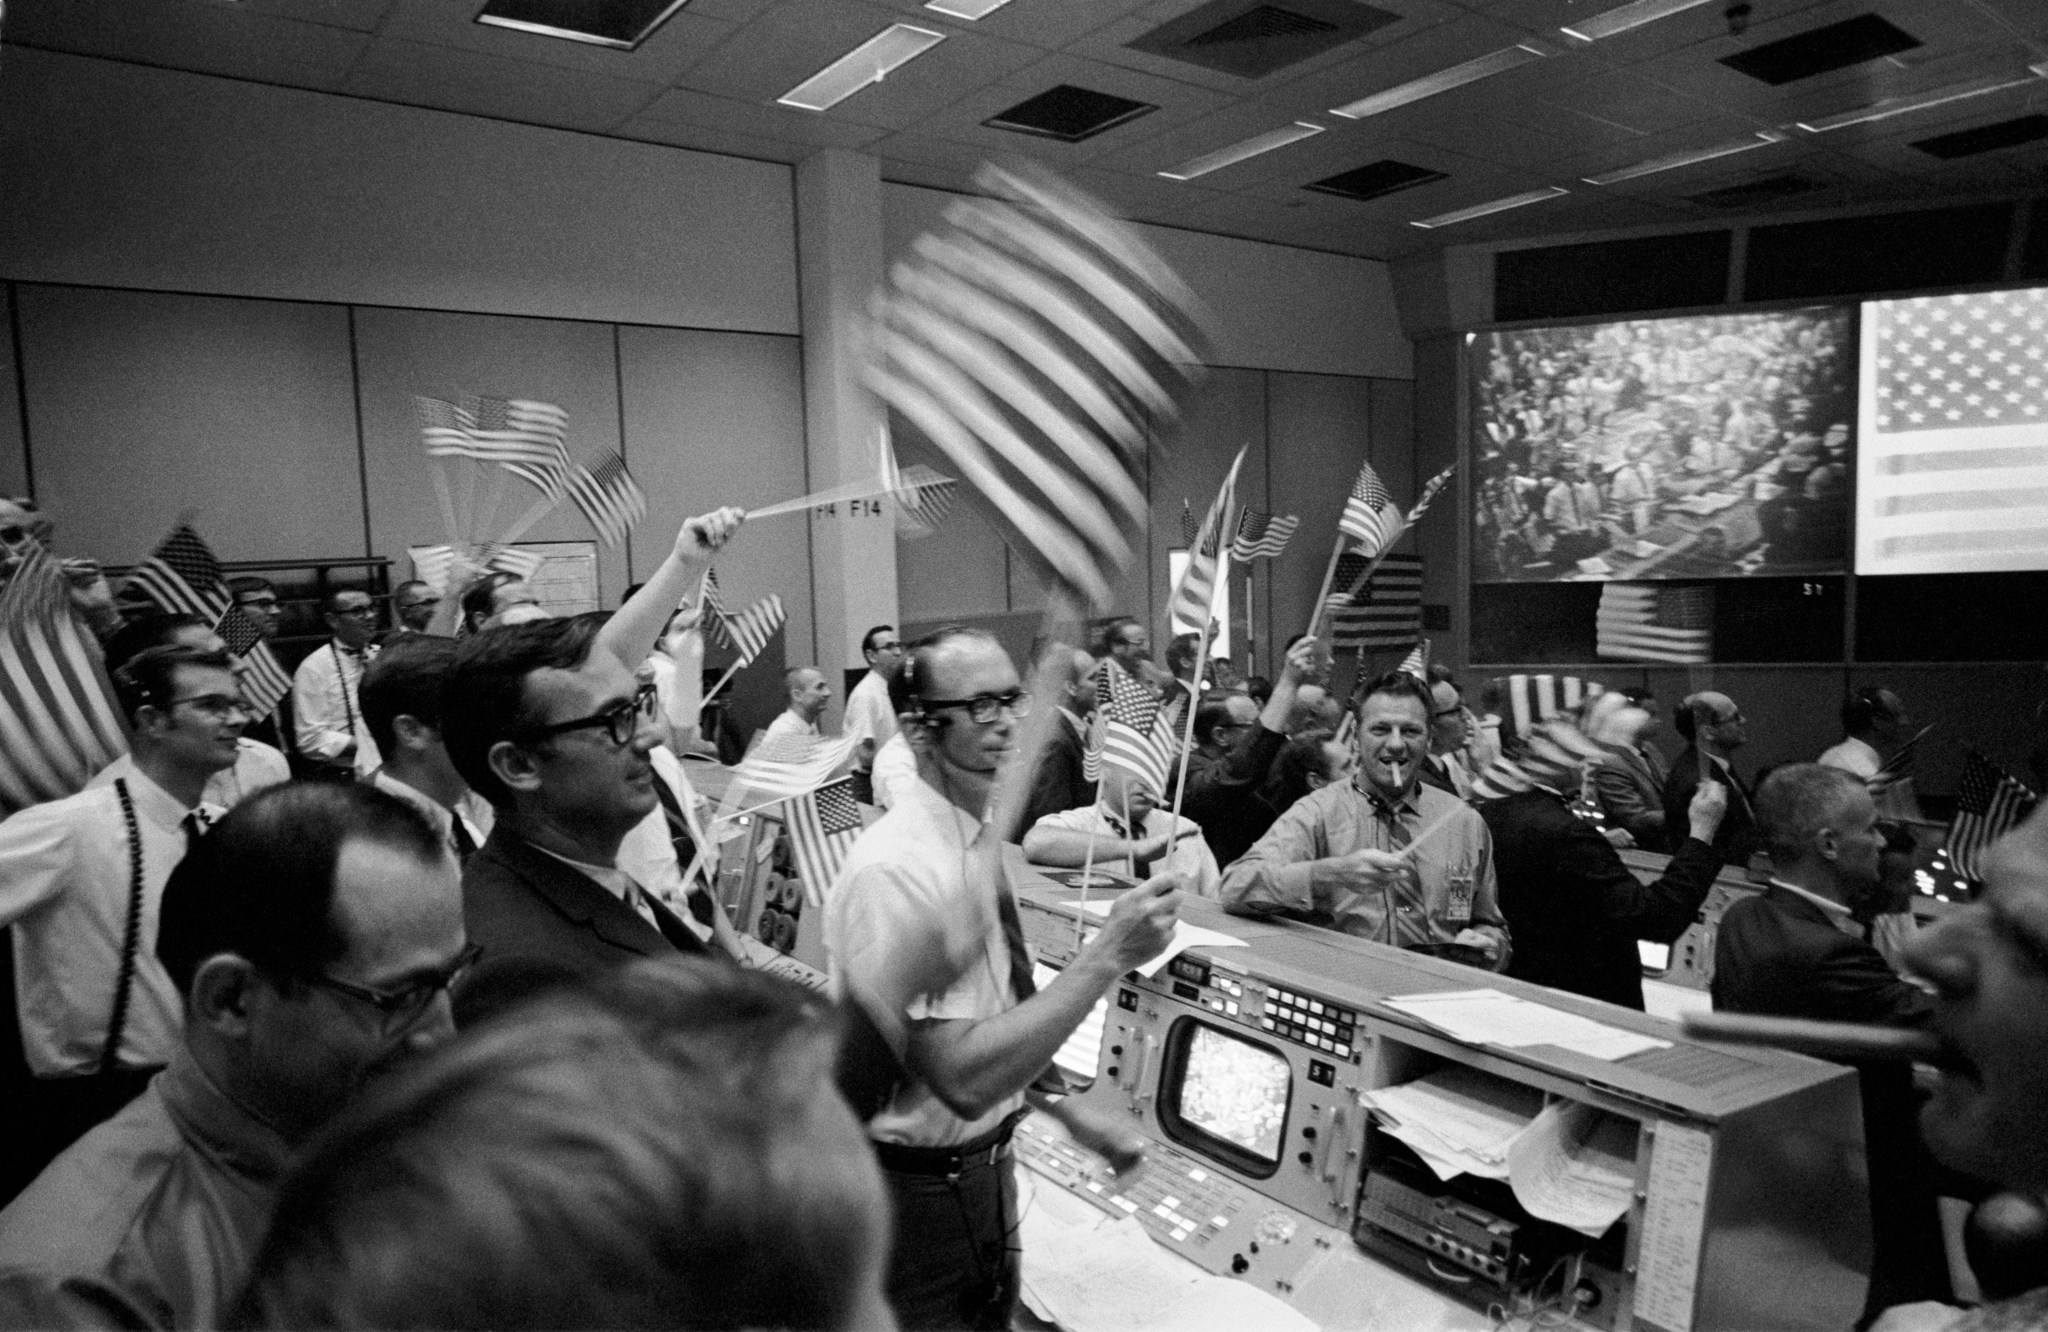 View of Mission Control Center celebrating conclusion of Apollo 11 mission